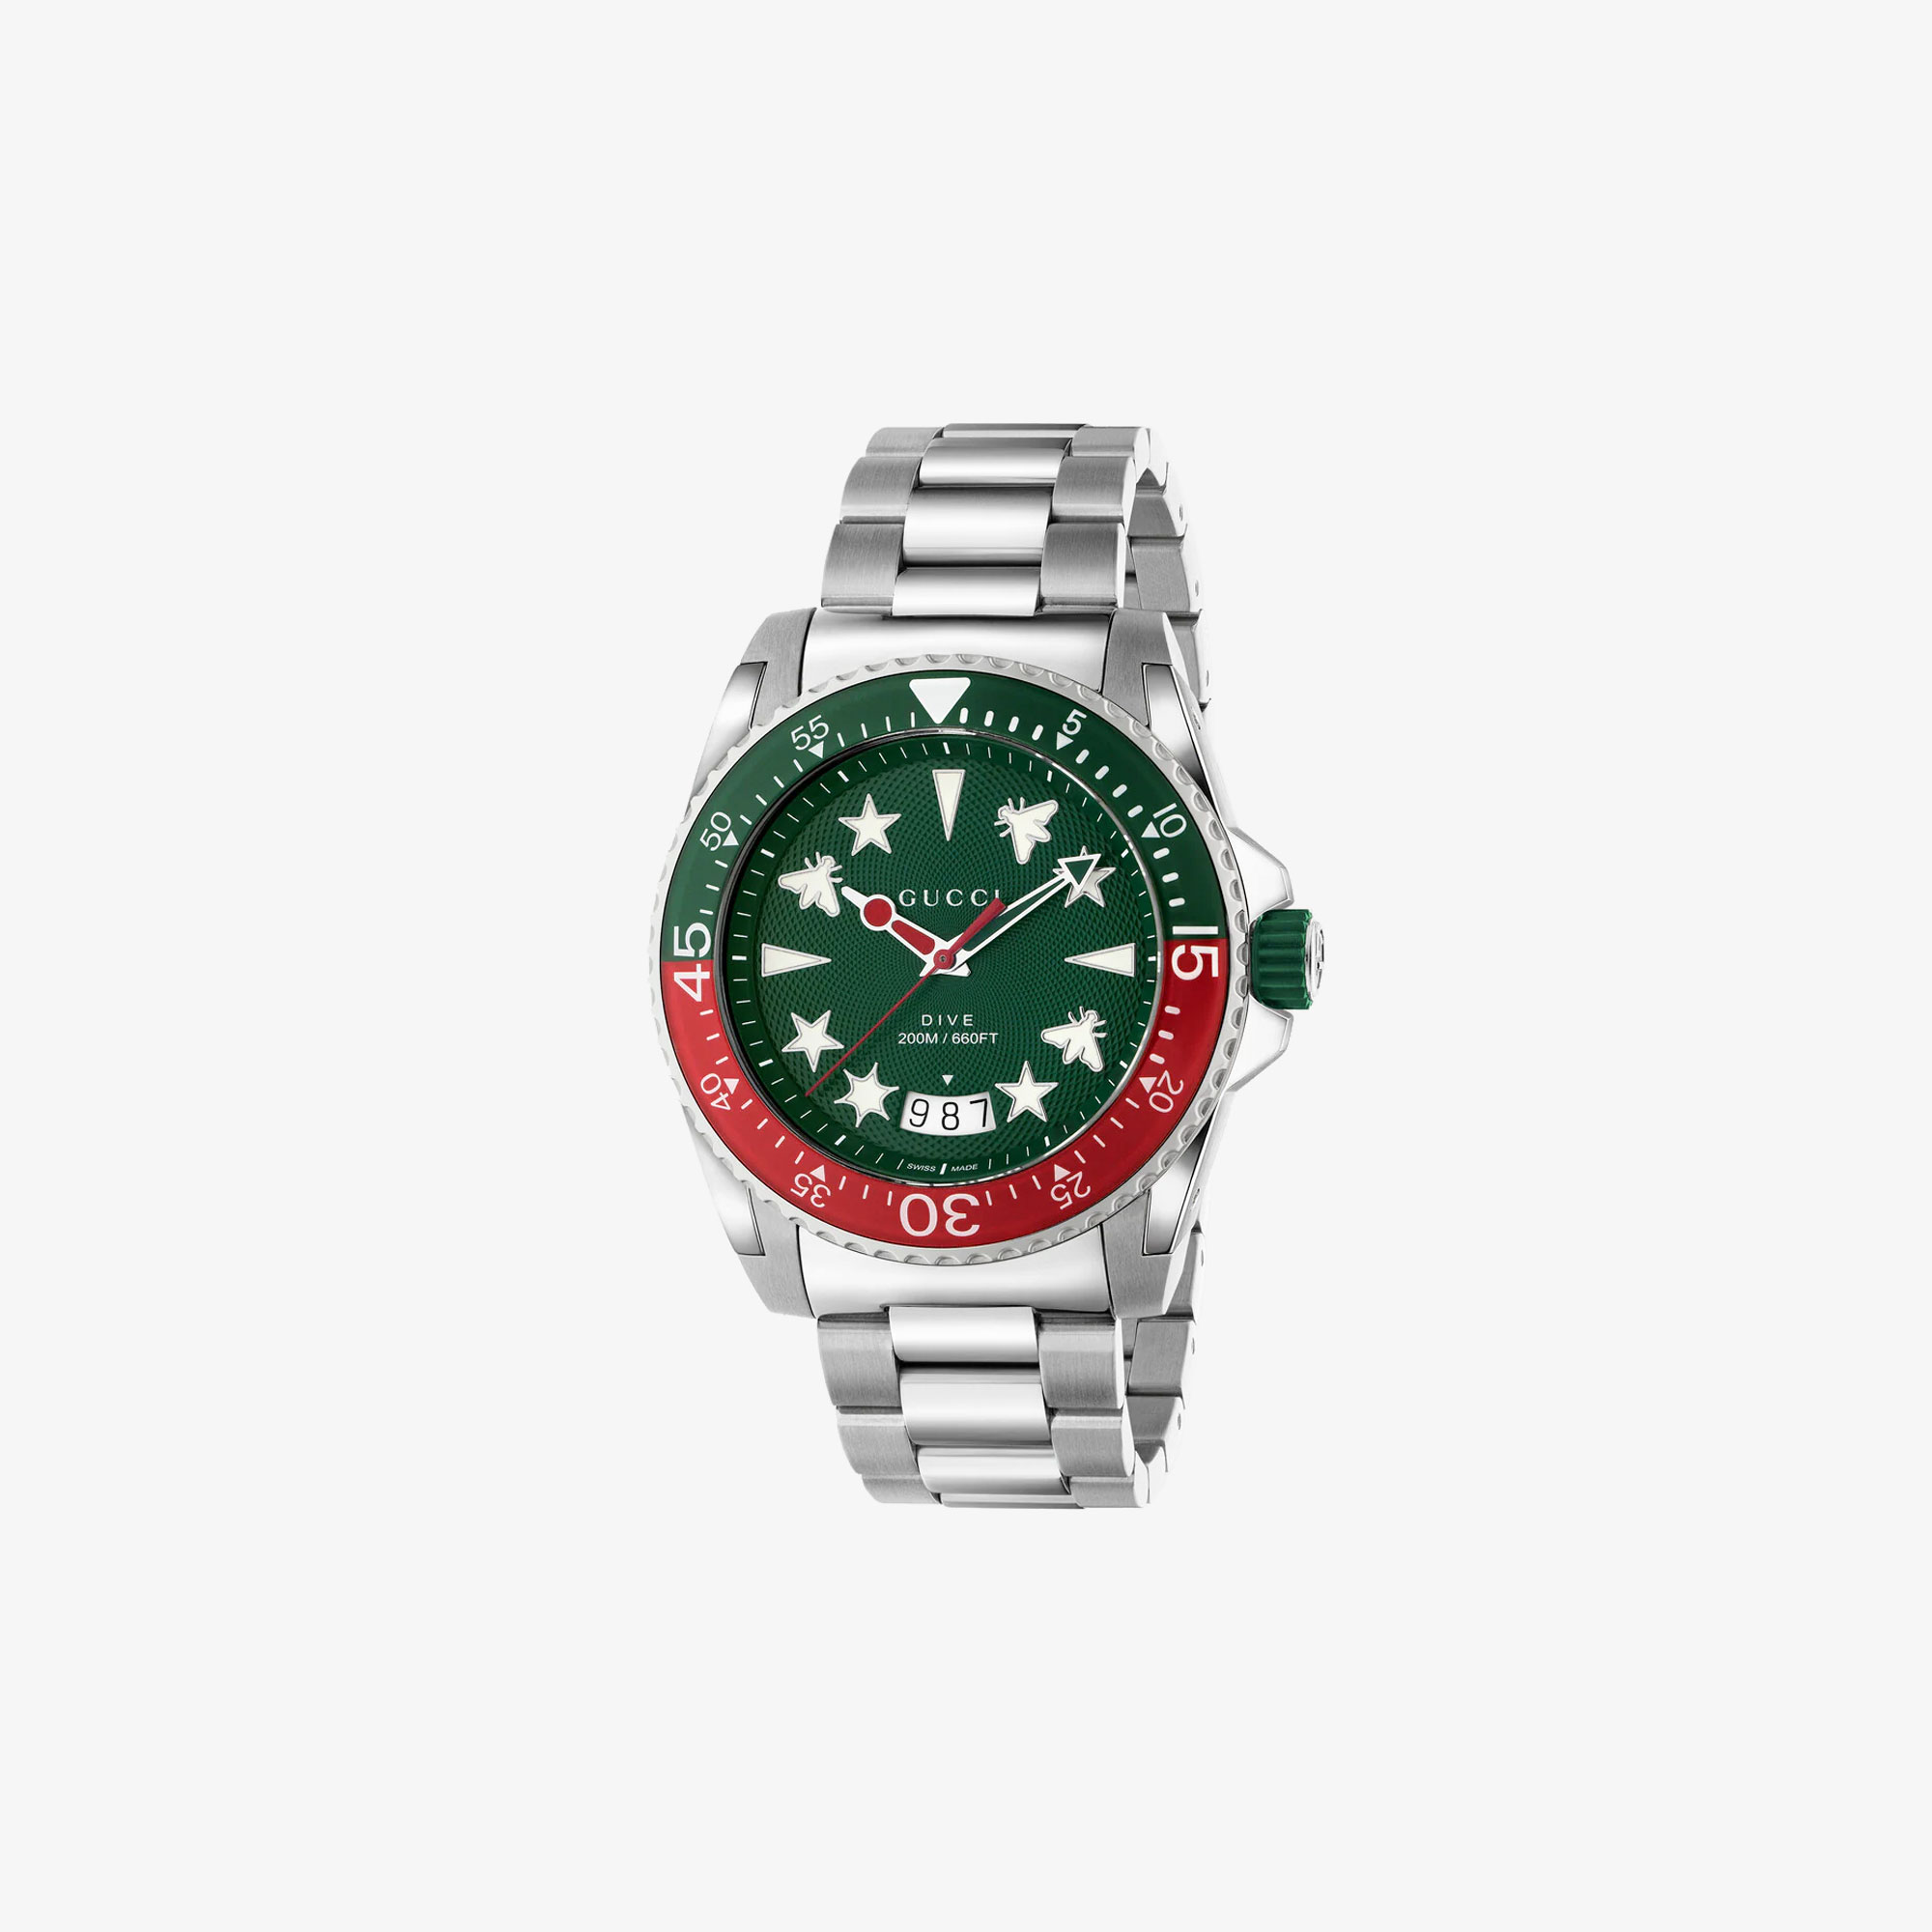 GUCCI DIVE WATCH WITH RED-GREEN BEZEL